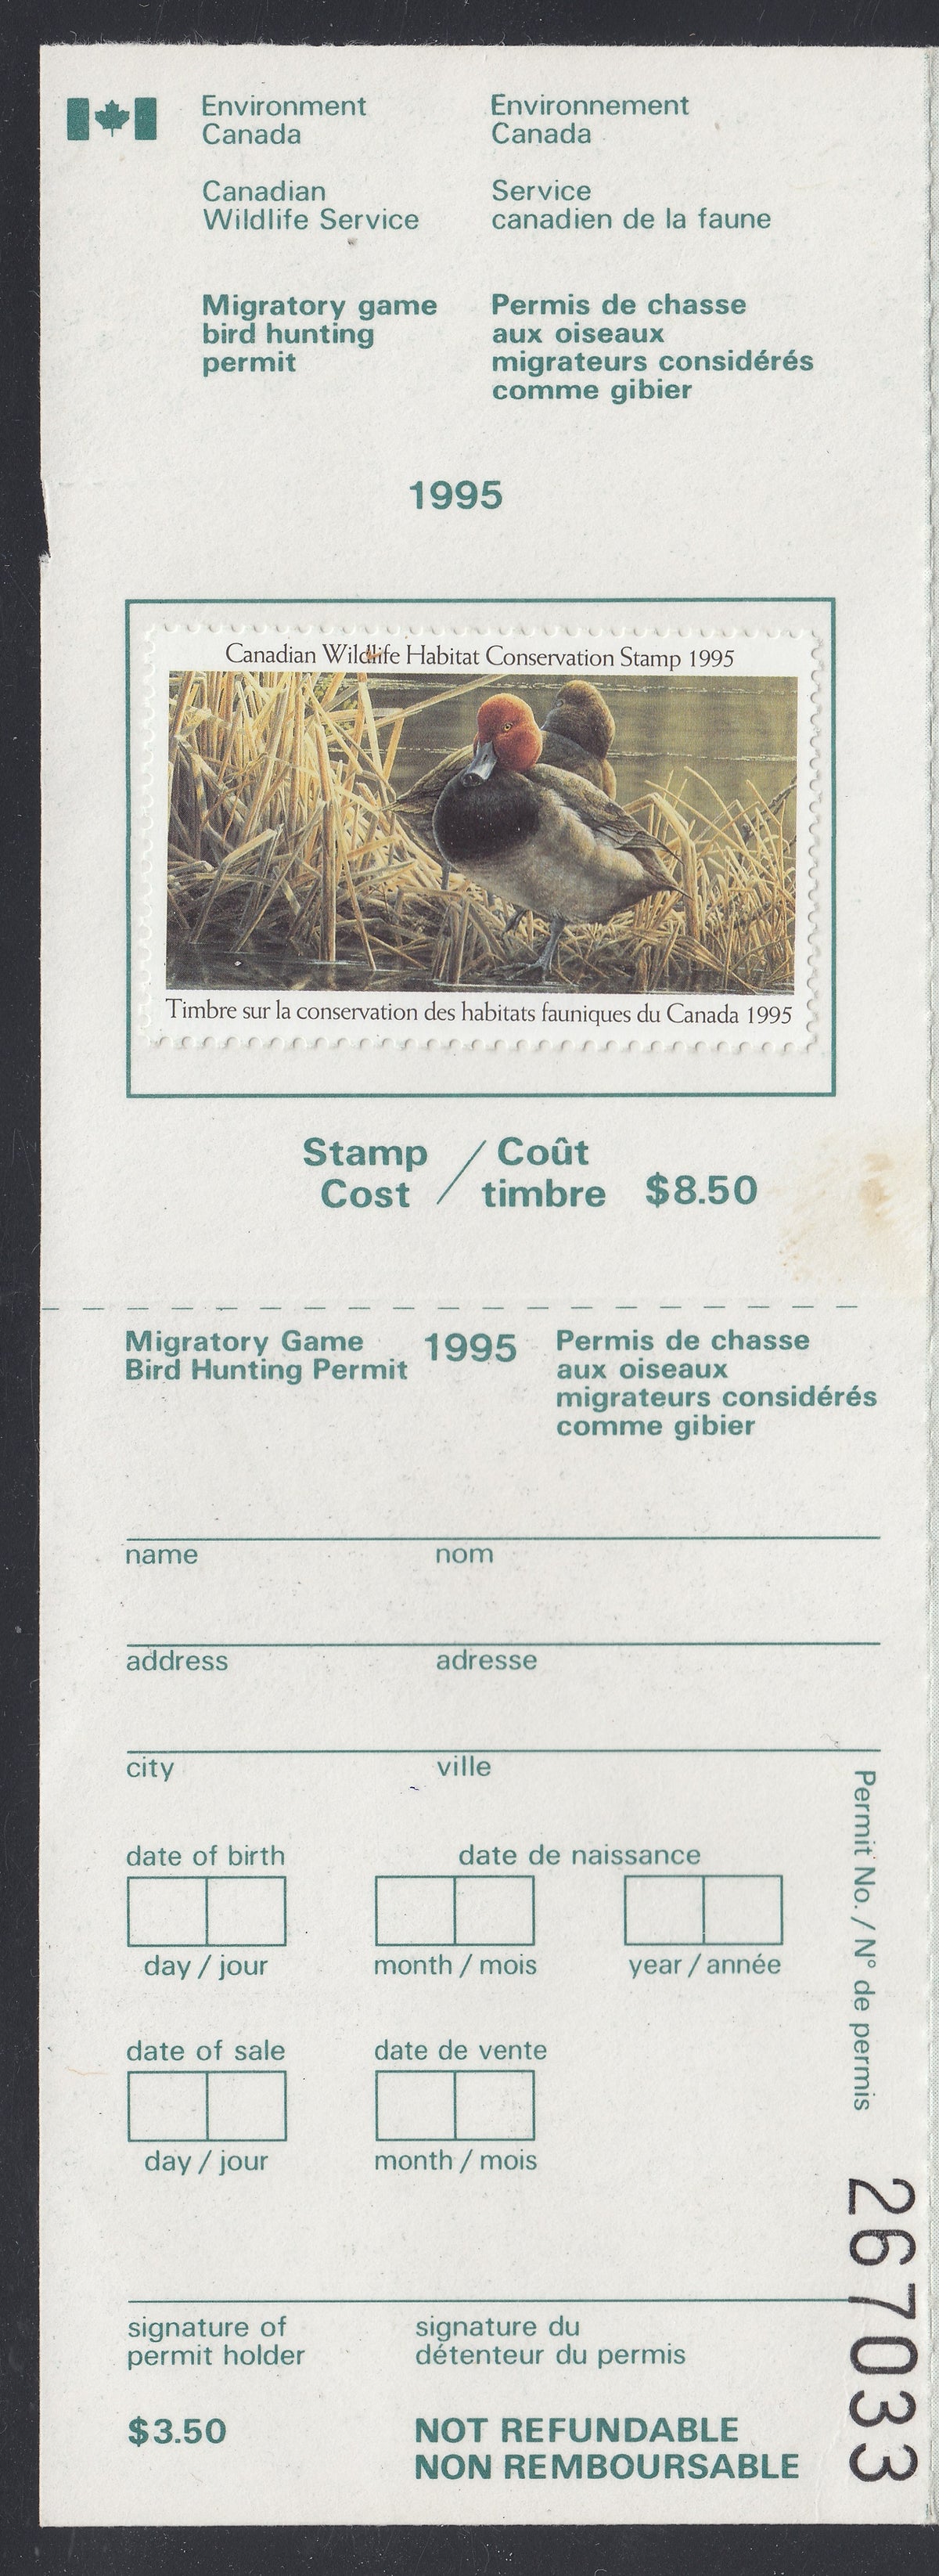 0011FW2105 - FWH11 - Used on License